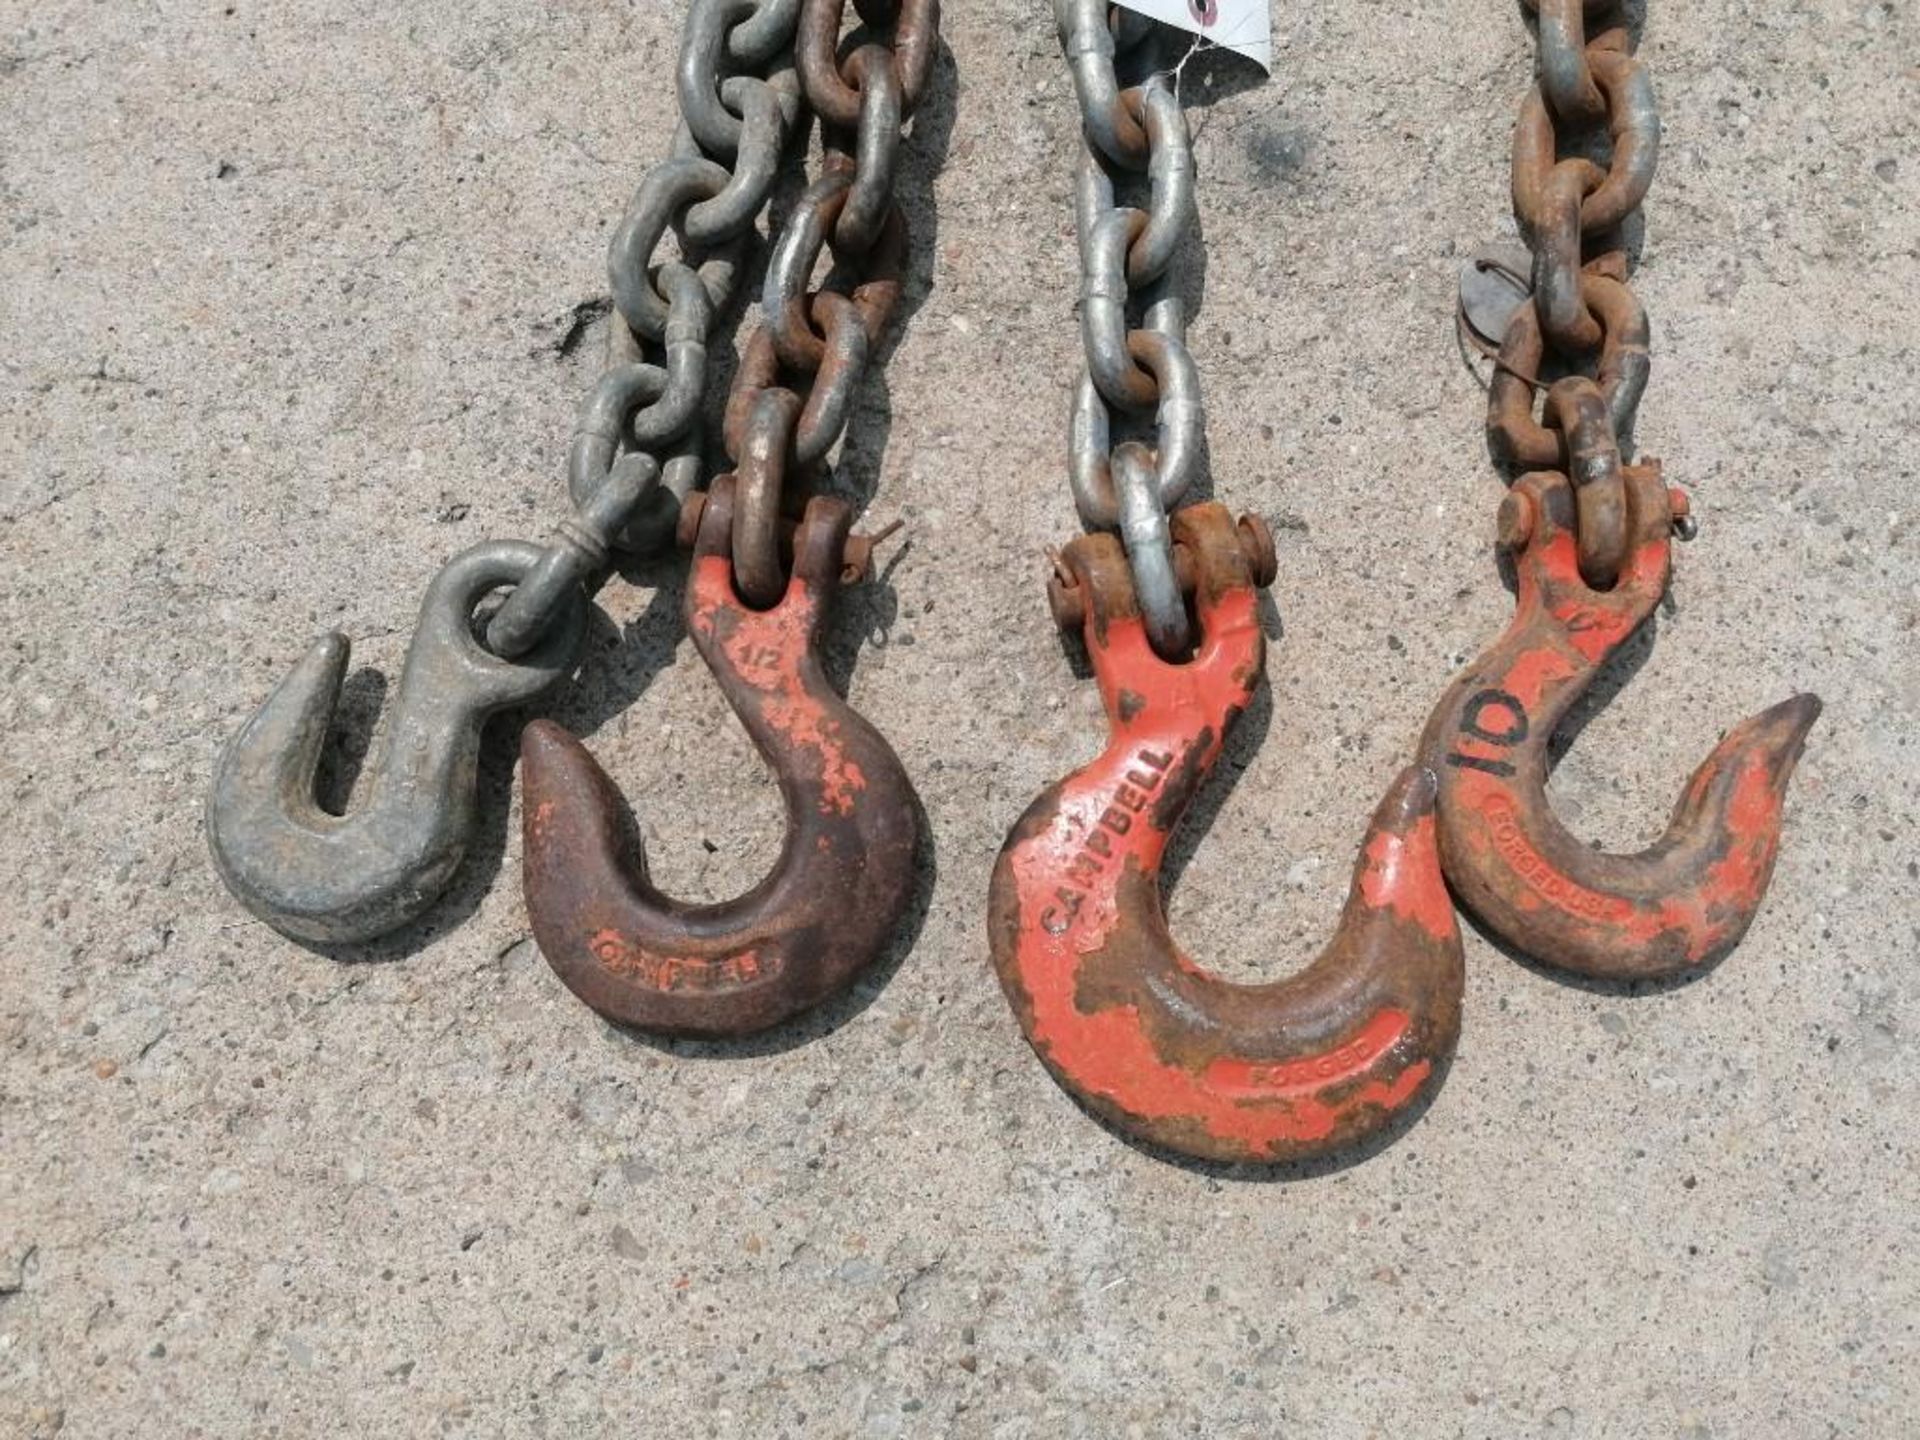 (3) 1/2" USA 9' & (1) 1/2" USA 8' Chain with Hook. Located at 301 E Henry Street, Mt. Pleasant, IA - Image 2 of 3